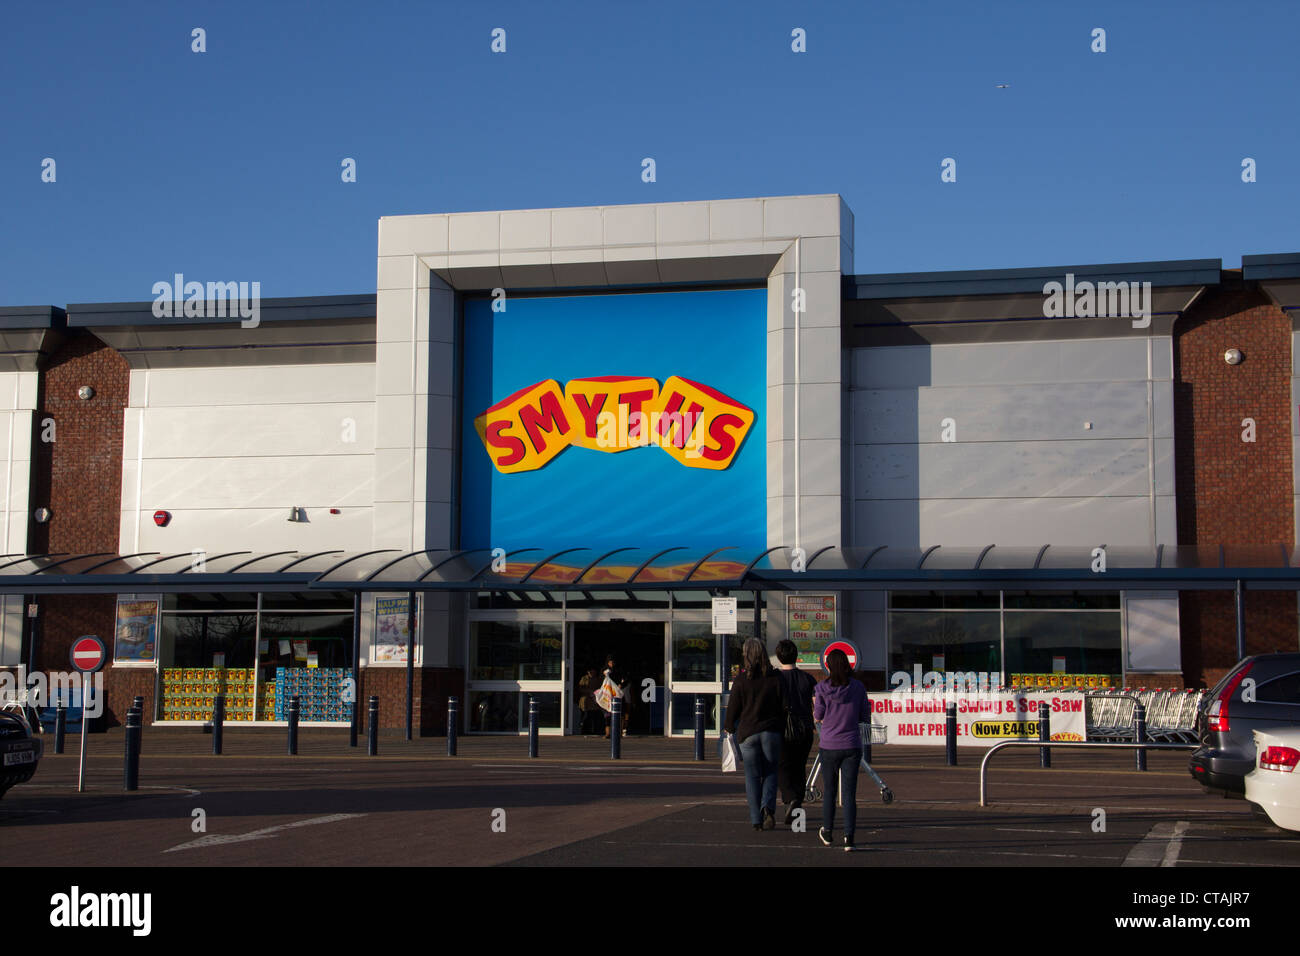 Middlebrook Retail Park High Resolution Stock Photography and Images - Alamy